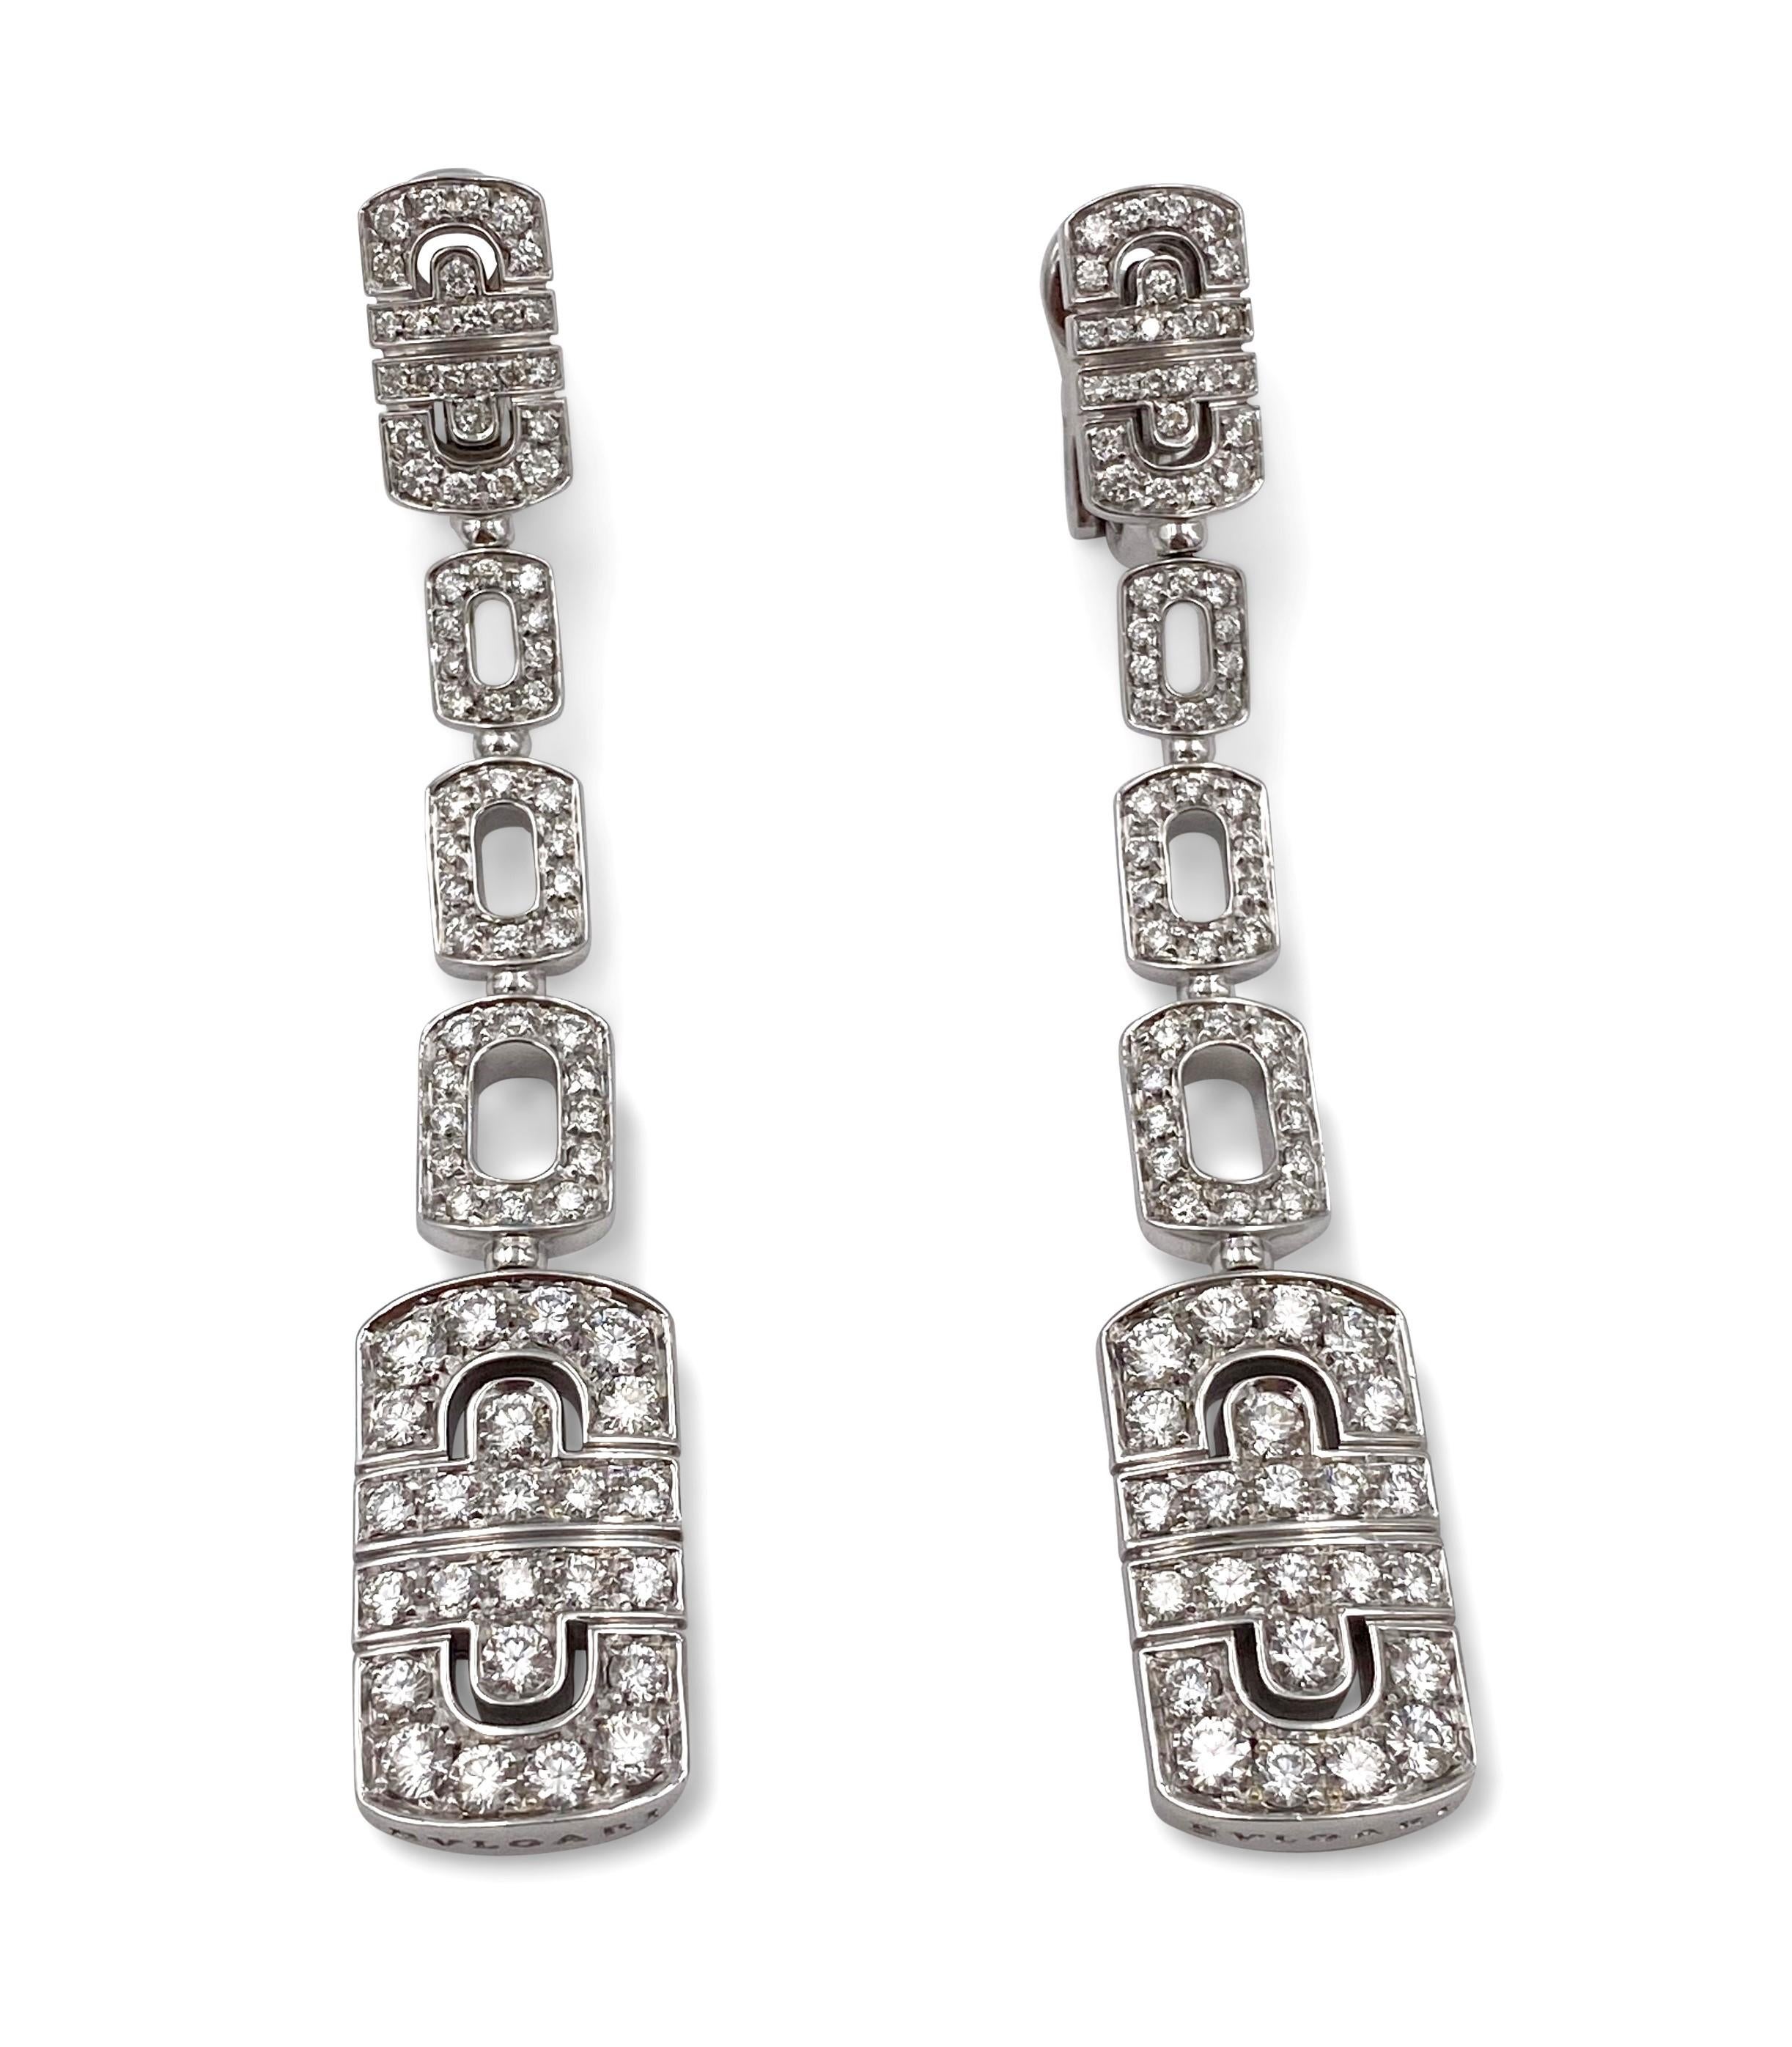 Authentic Bulgari Parentesi long earrings crafted in 18 karat white gold and set with approx. 1.65 carats of round brilliant cut diamonds (F color, VS clarity). The earrings measure 65mm in length, 12mm at widest point. Comes with the original